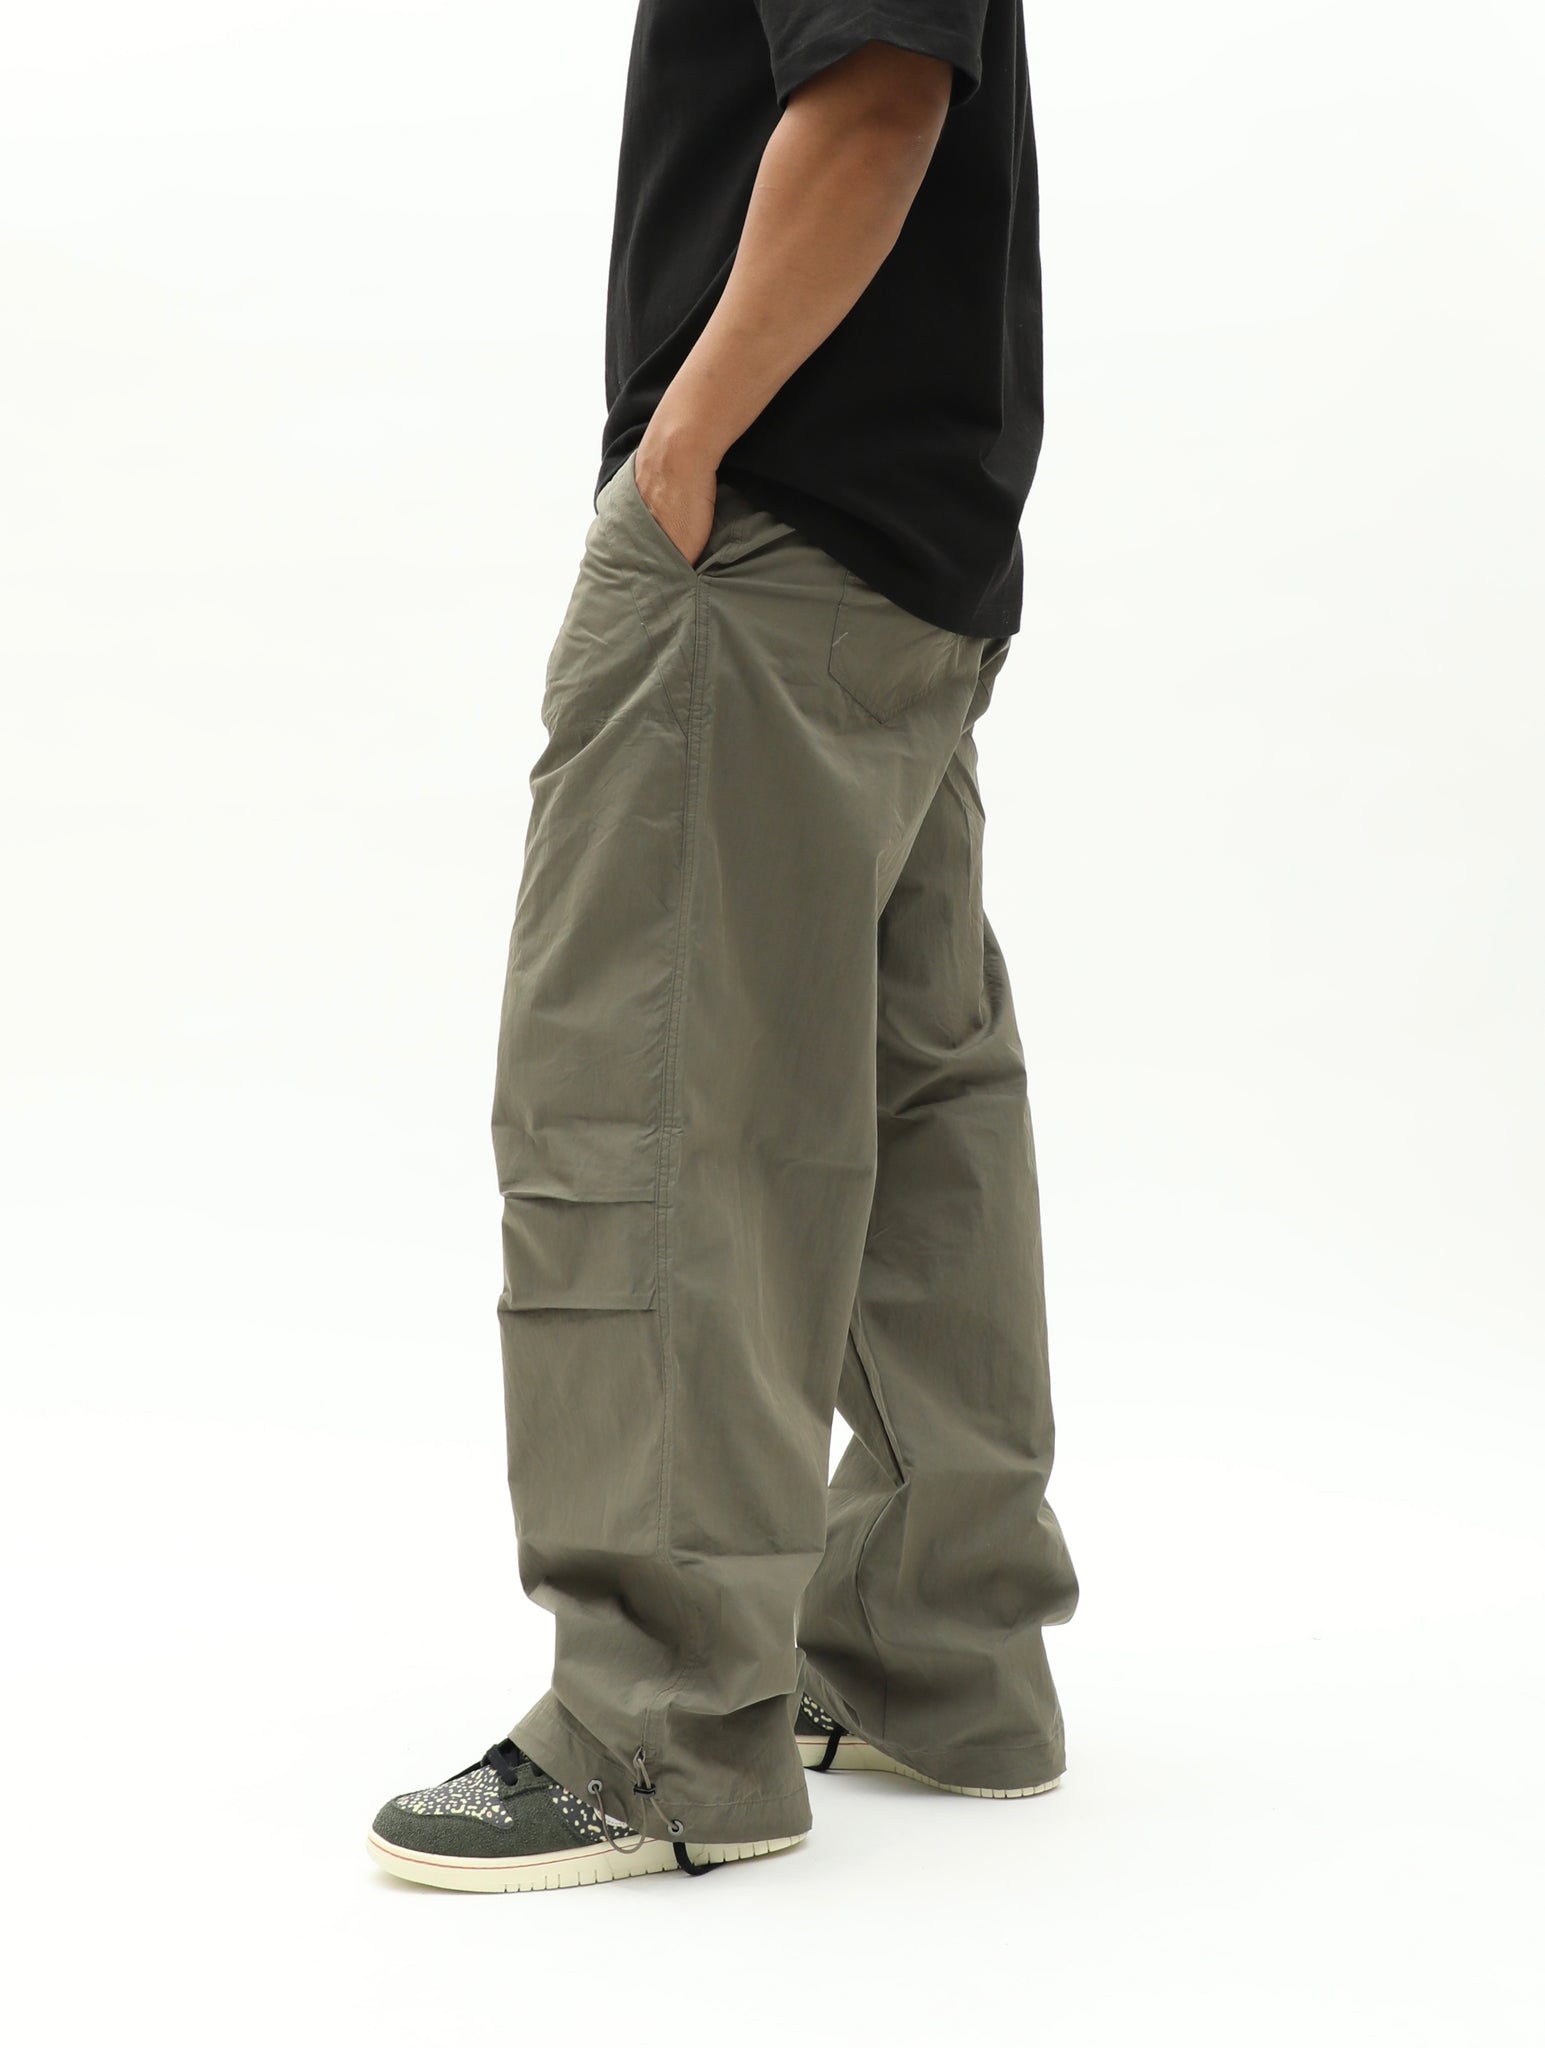 Tech Baggy Trousers - Olive